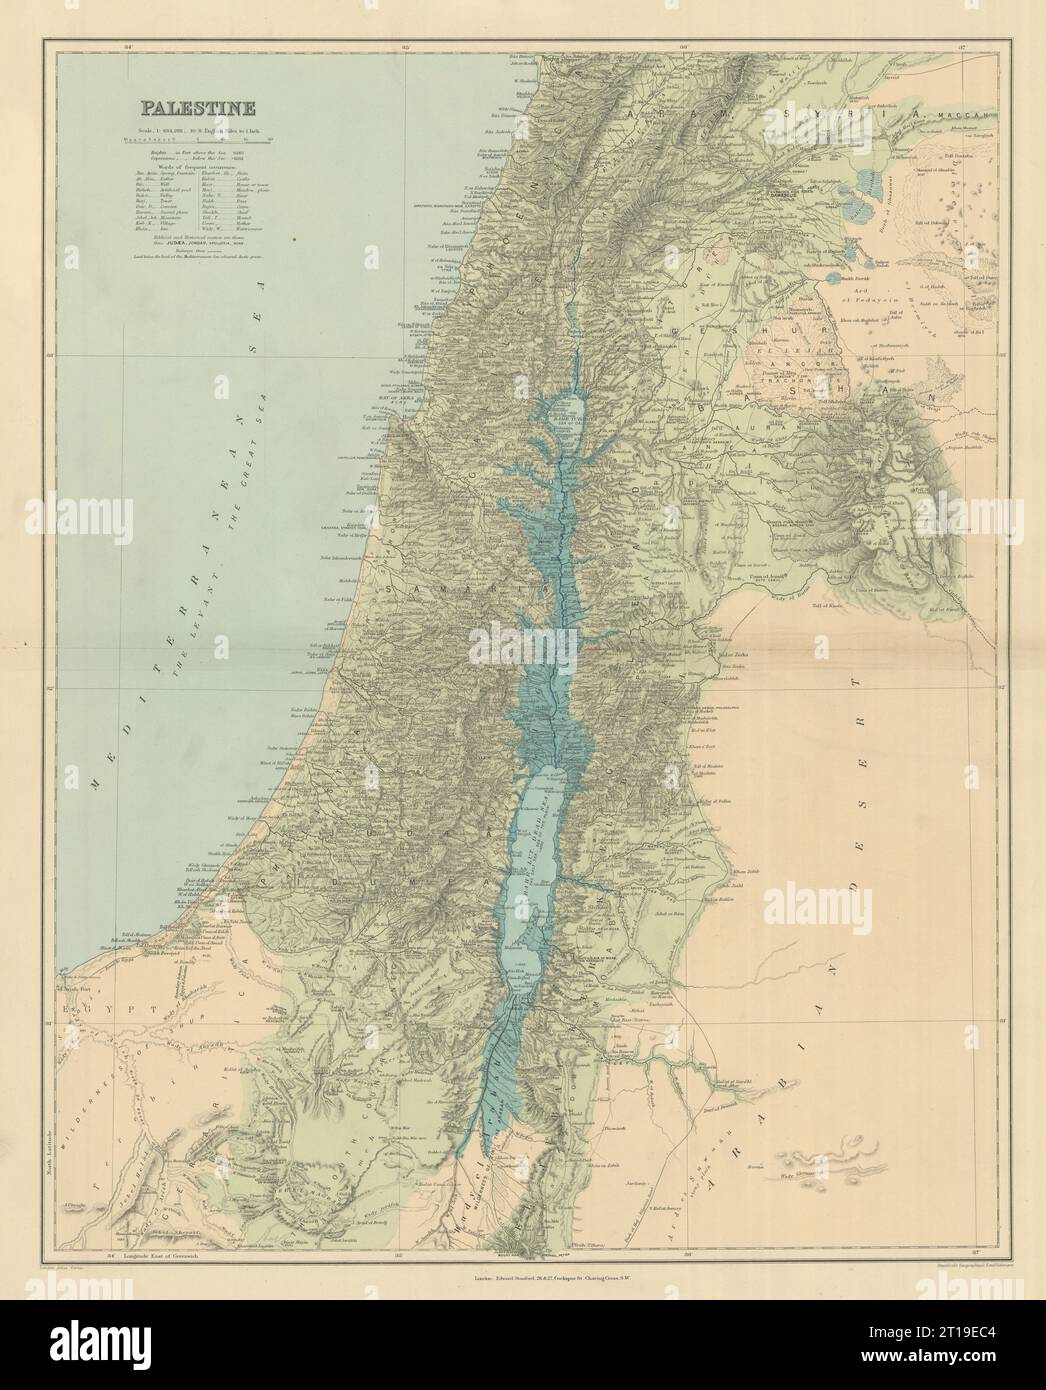 Palestine Holy Land Israel. Biblical & historical names. STANFORD 1894 old map Stock Photo